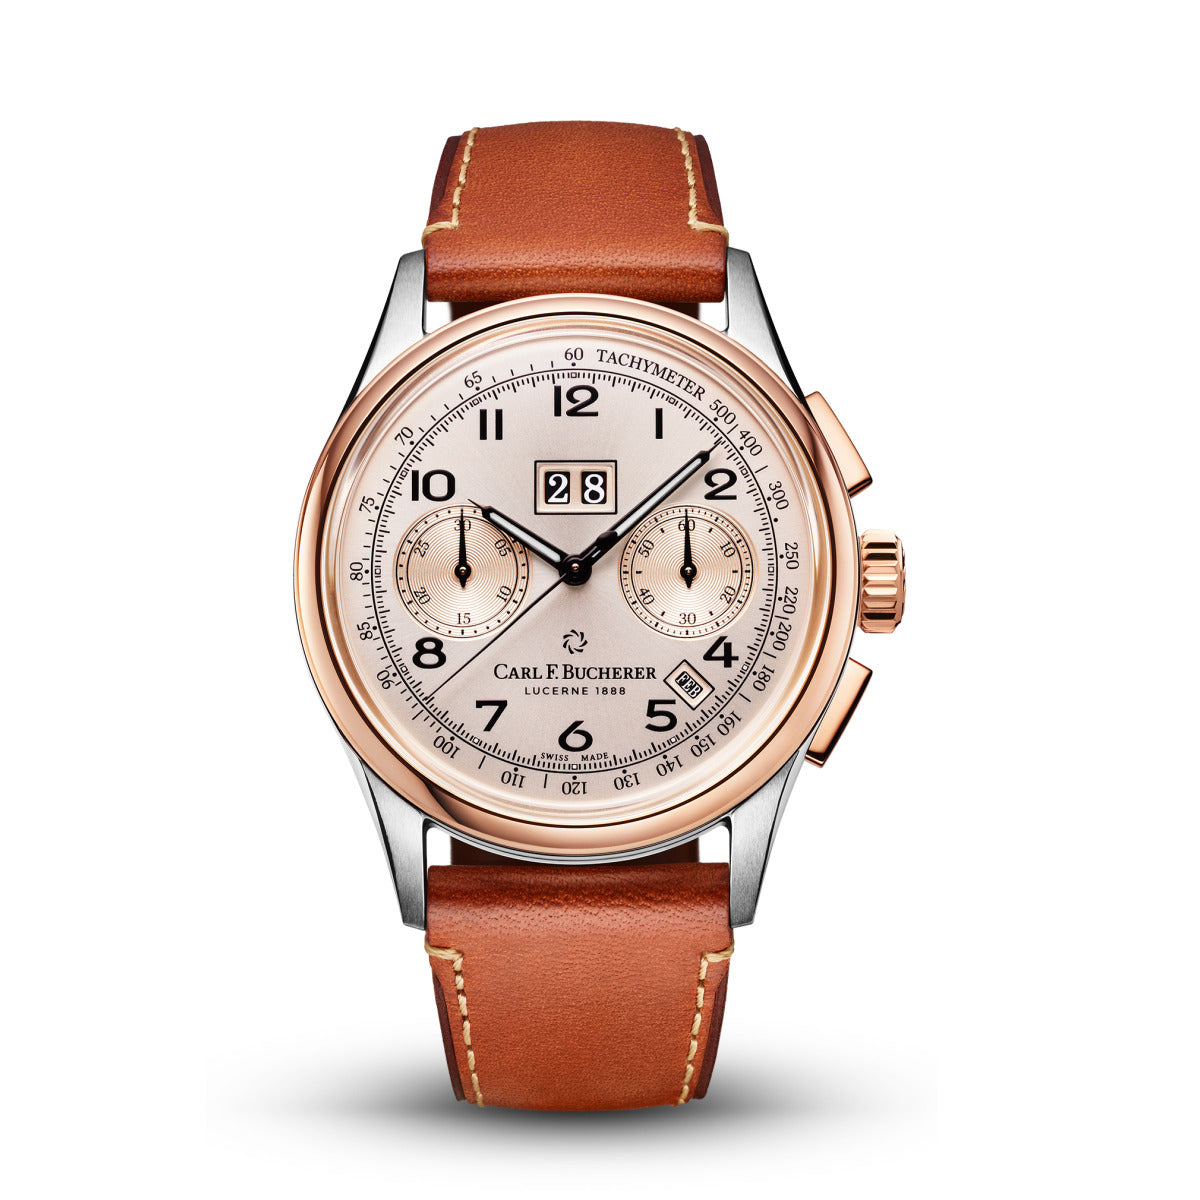 Carl F. Bucherer Haritage Annual calendar Chronograph Stainless steel & 18K Rose gold Limited Edition Men's Watch